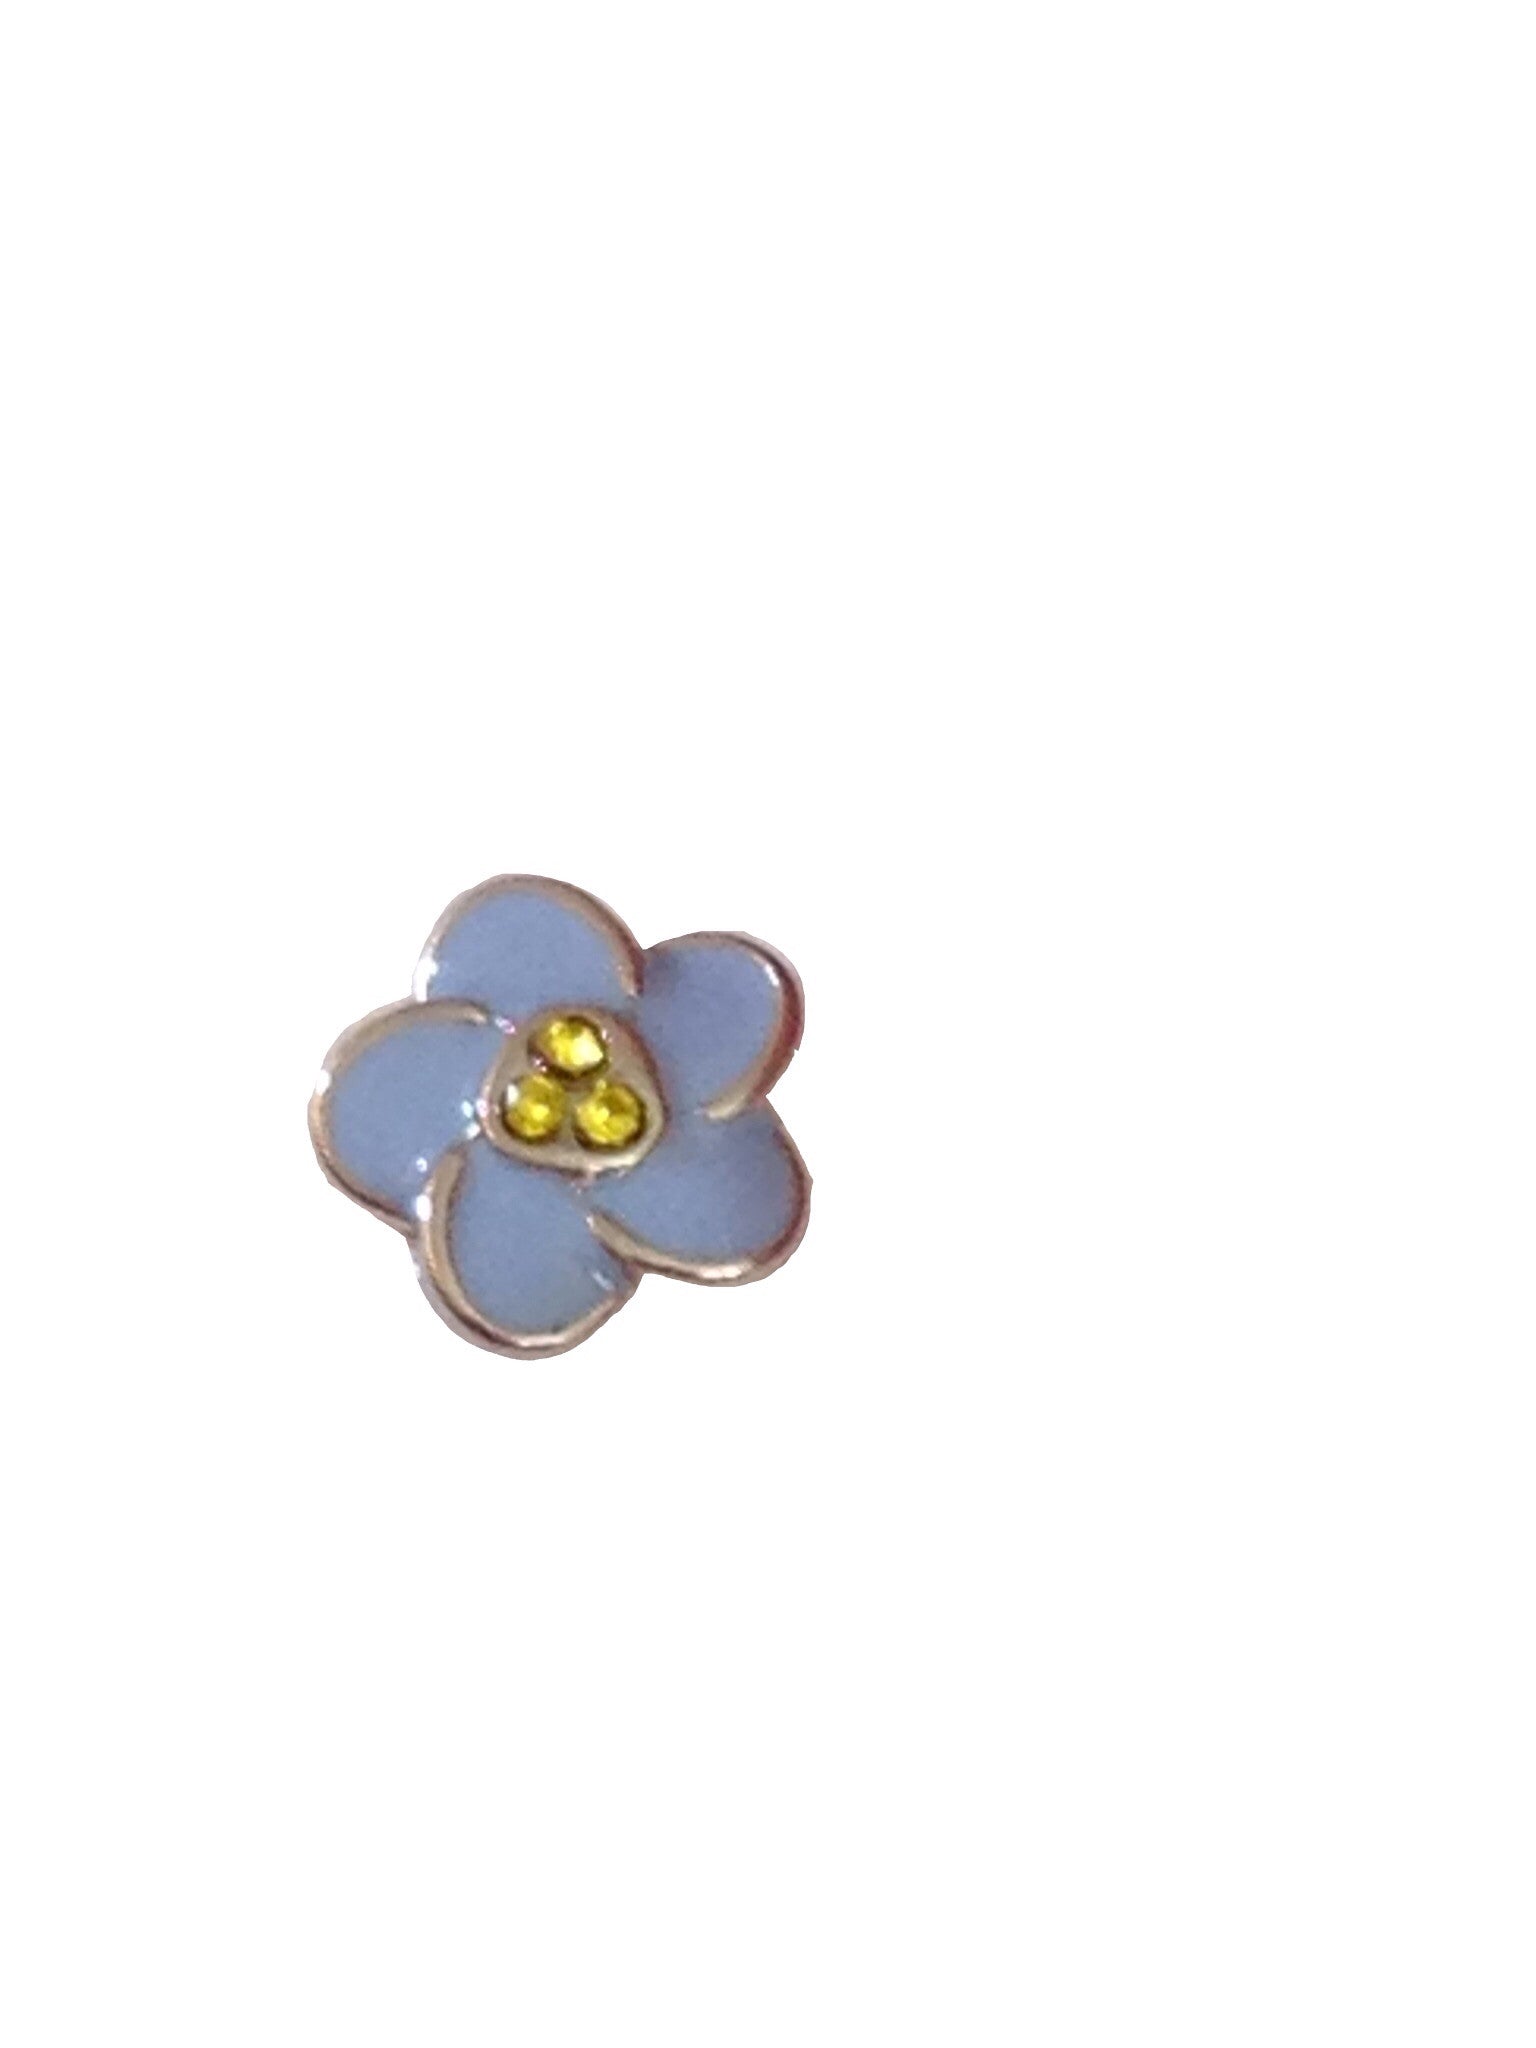 Forget Me Not Flower - Stoney Creek Charms